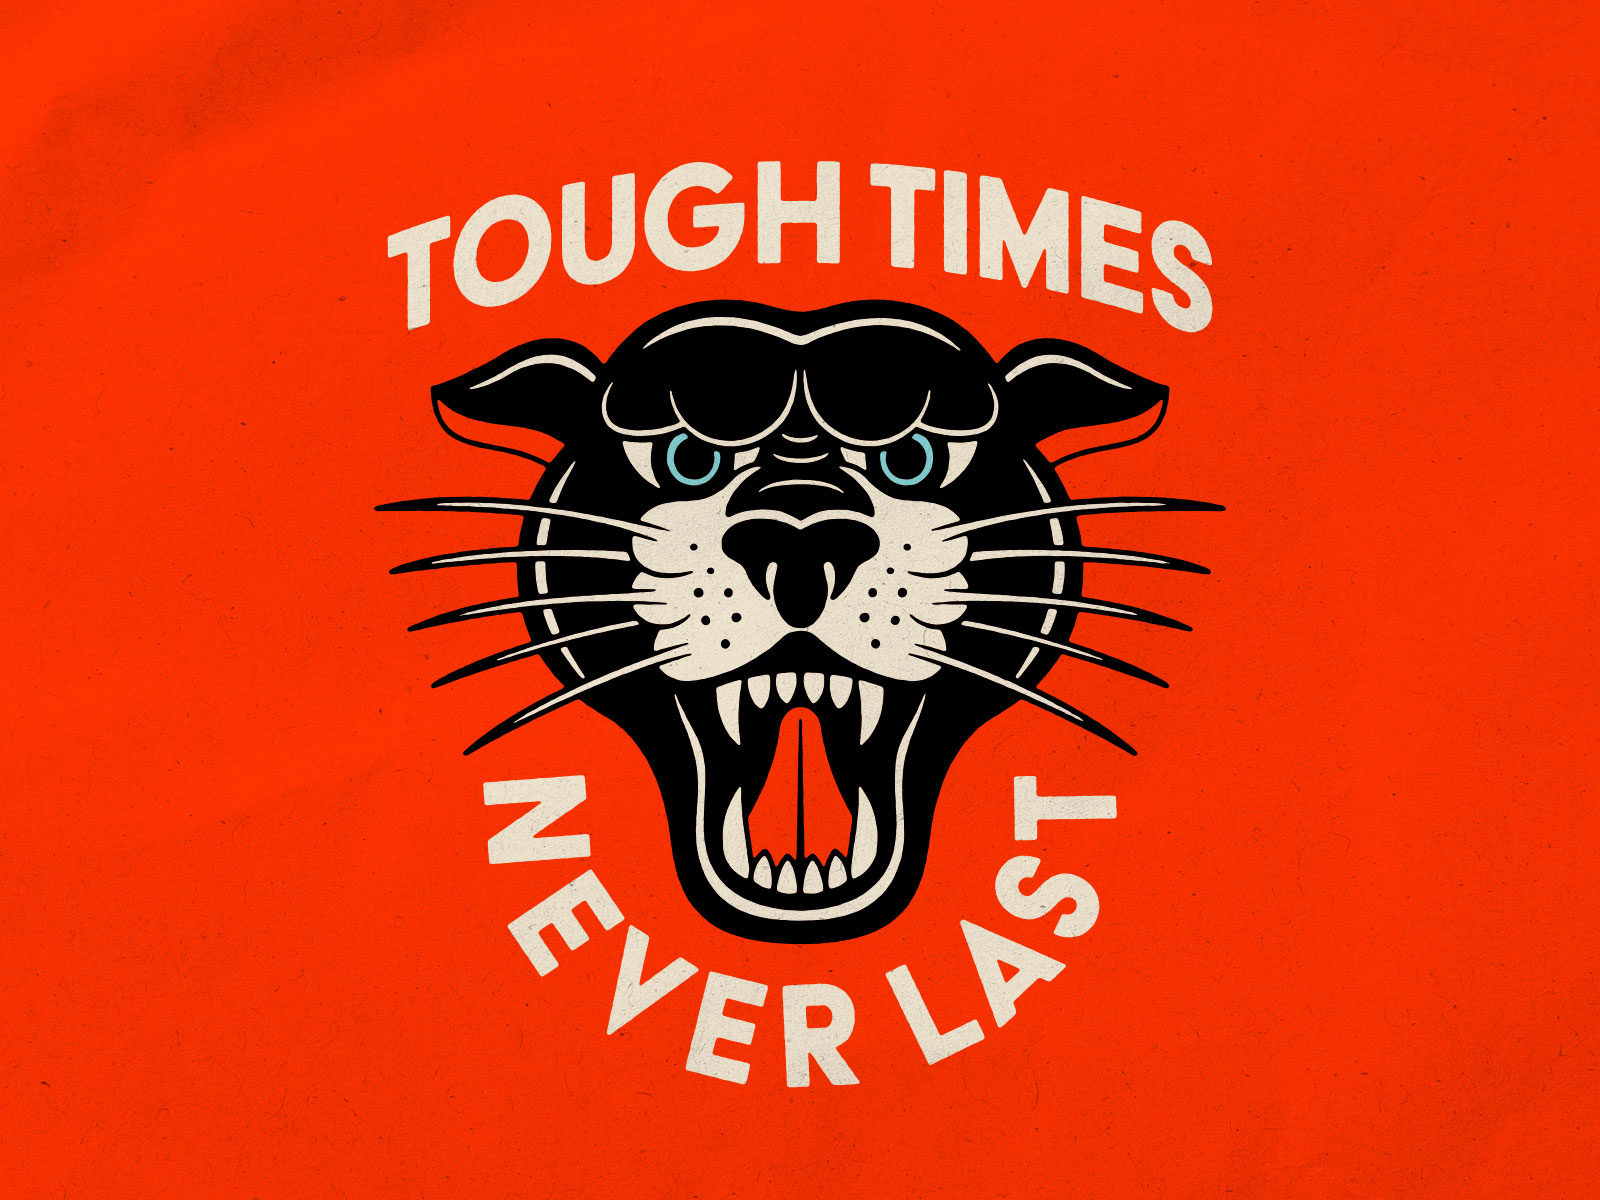 Tough Times Never Last! by Eric Lee on Dribbble